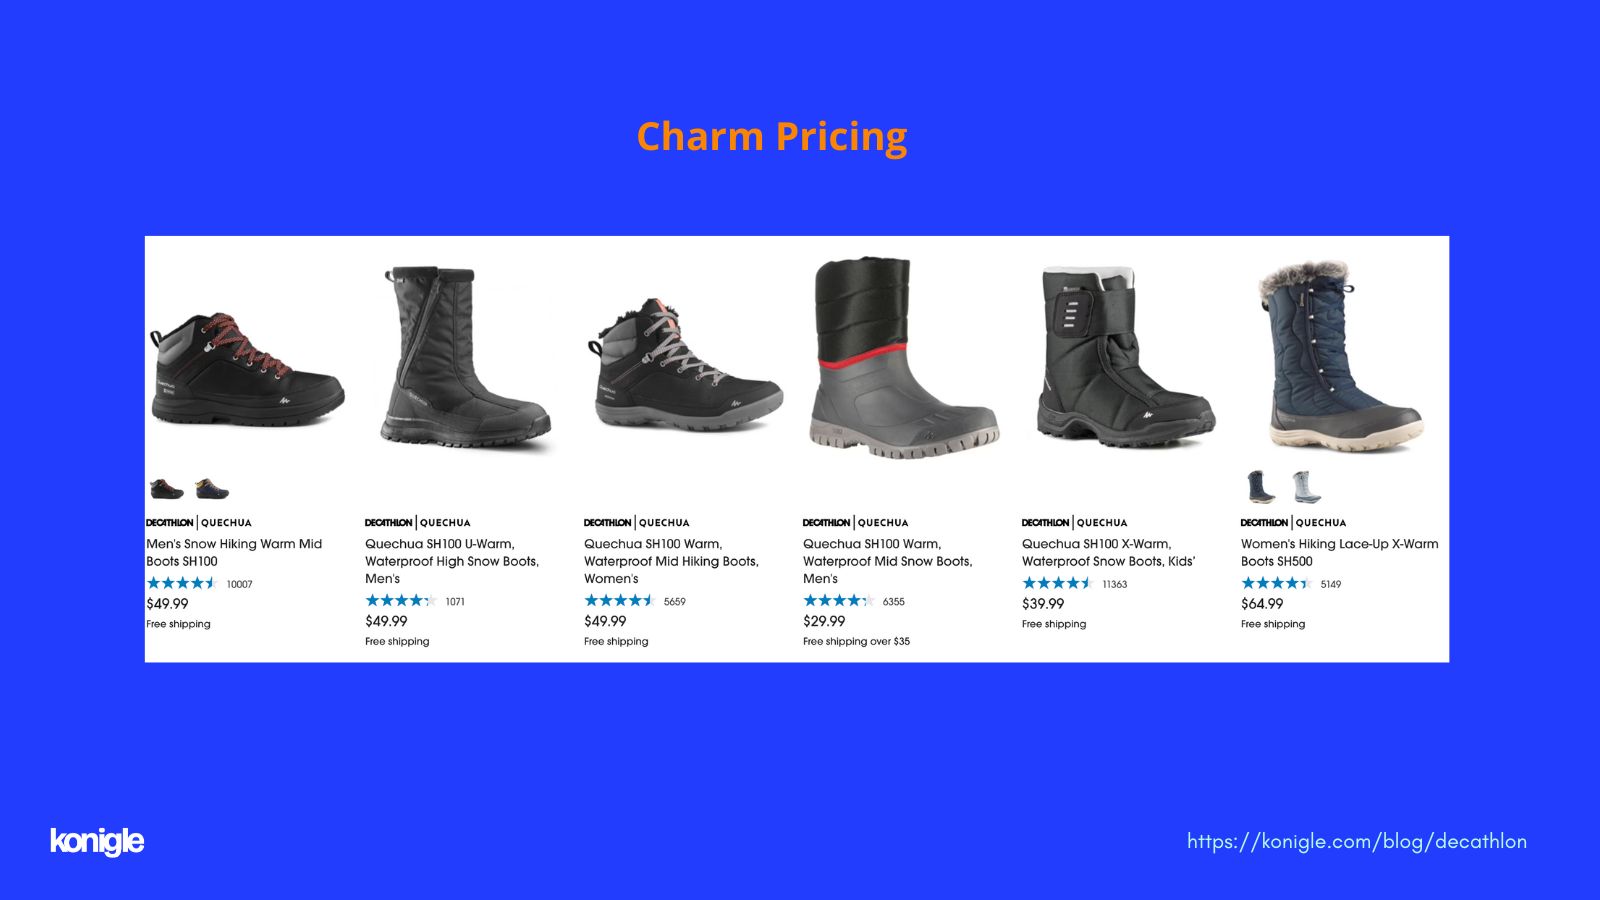 Decthlon uses the charm pricing tactic on decathlon.com